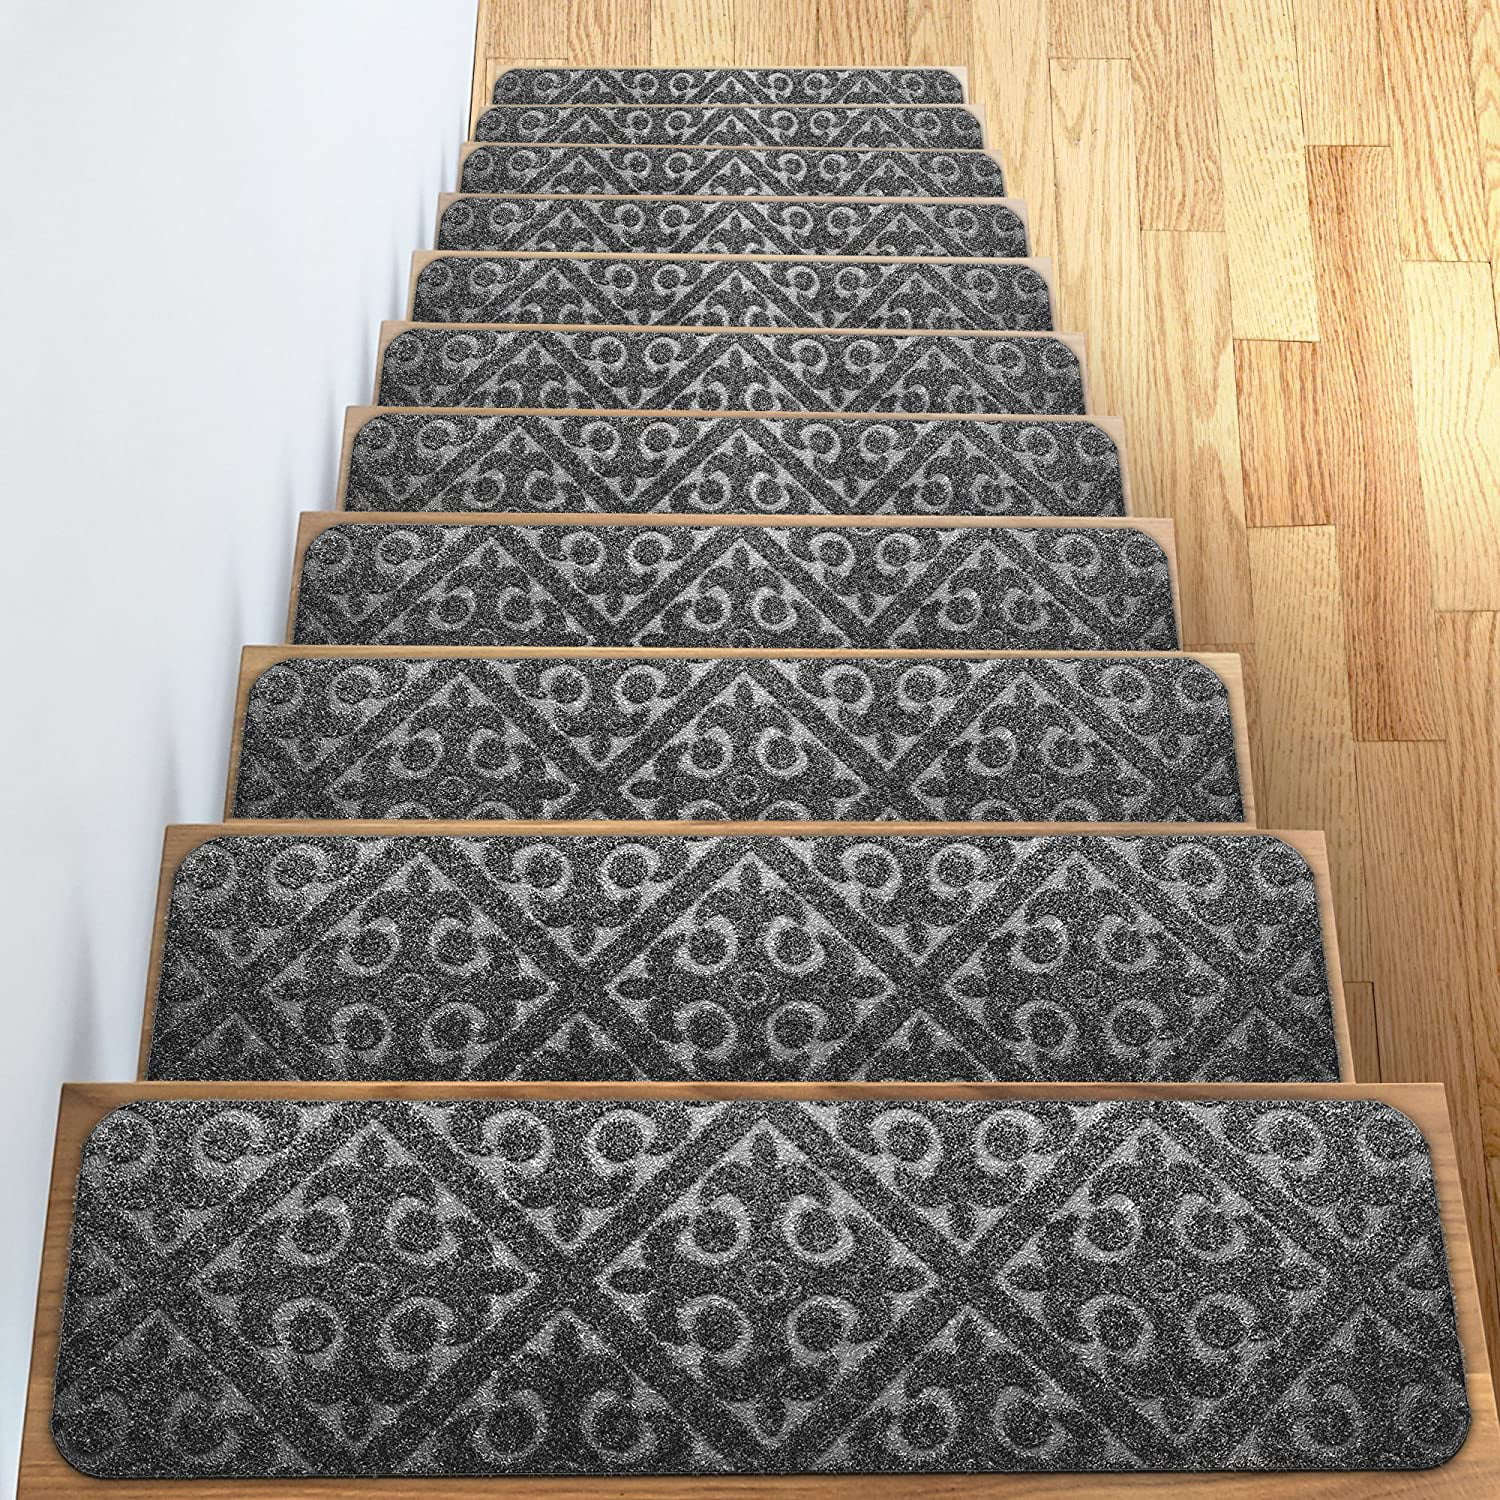 SET OF 13 Stair Rug Carpet Stair Treads Non Slip Skid Resistant Washable Mat US 